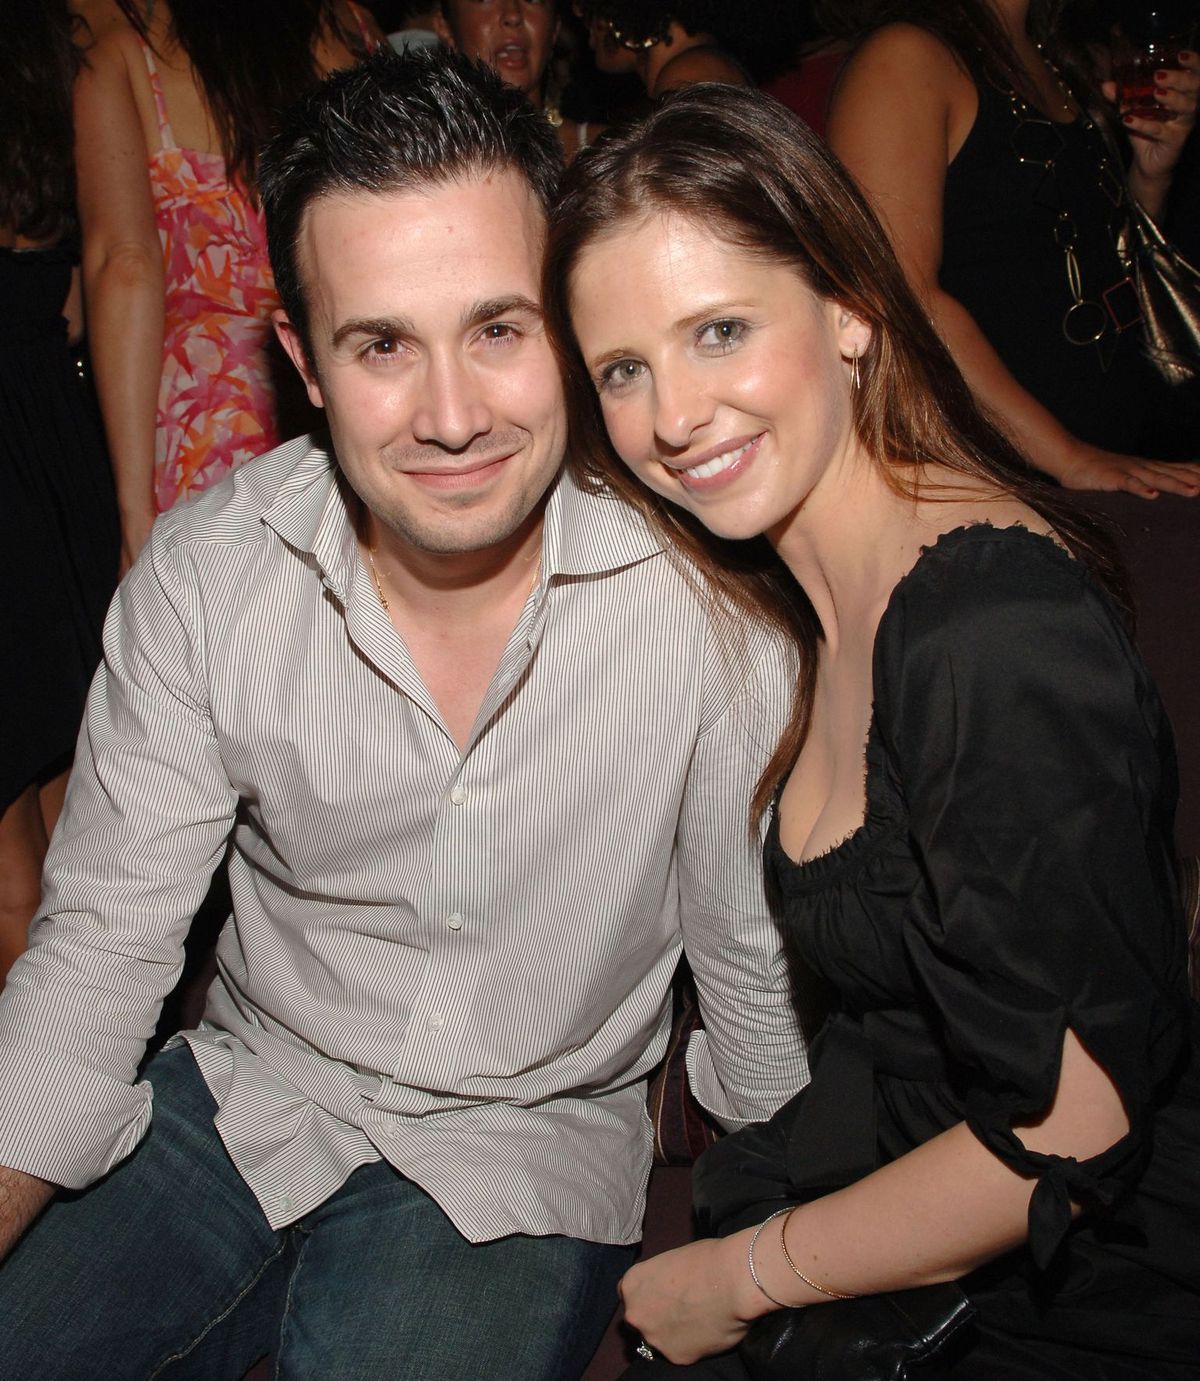 Celebrity couple Freddie Prinze Jr. and Sarah Michelle Gellar at DJ Cassidy's 25th Birthday Party in July 2006 | Source: Getty Images